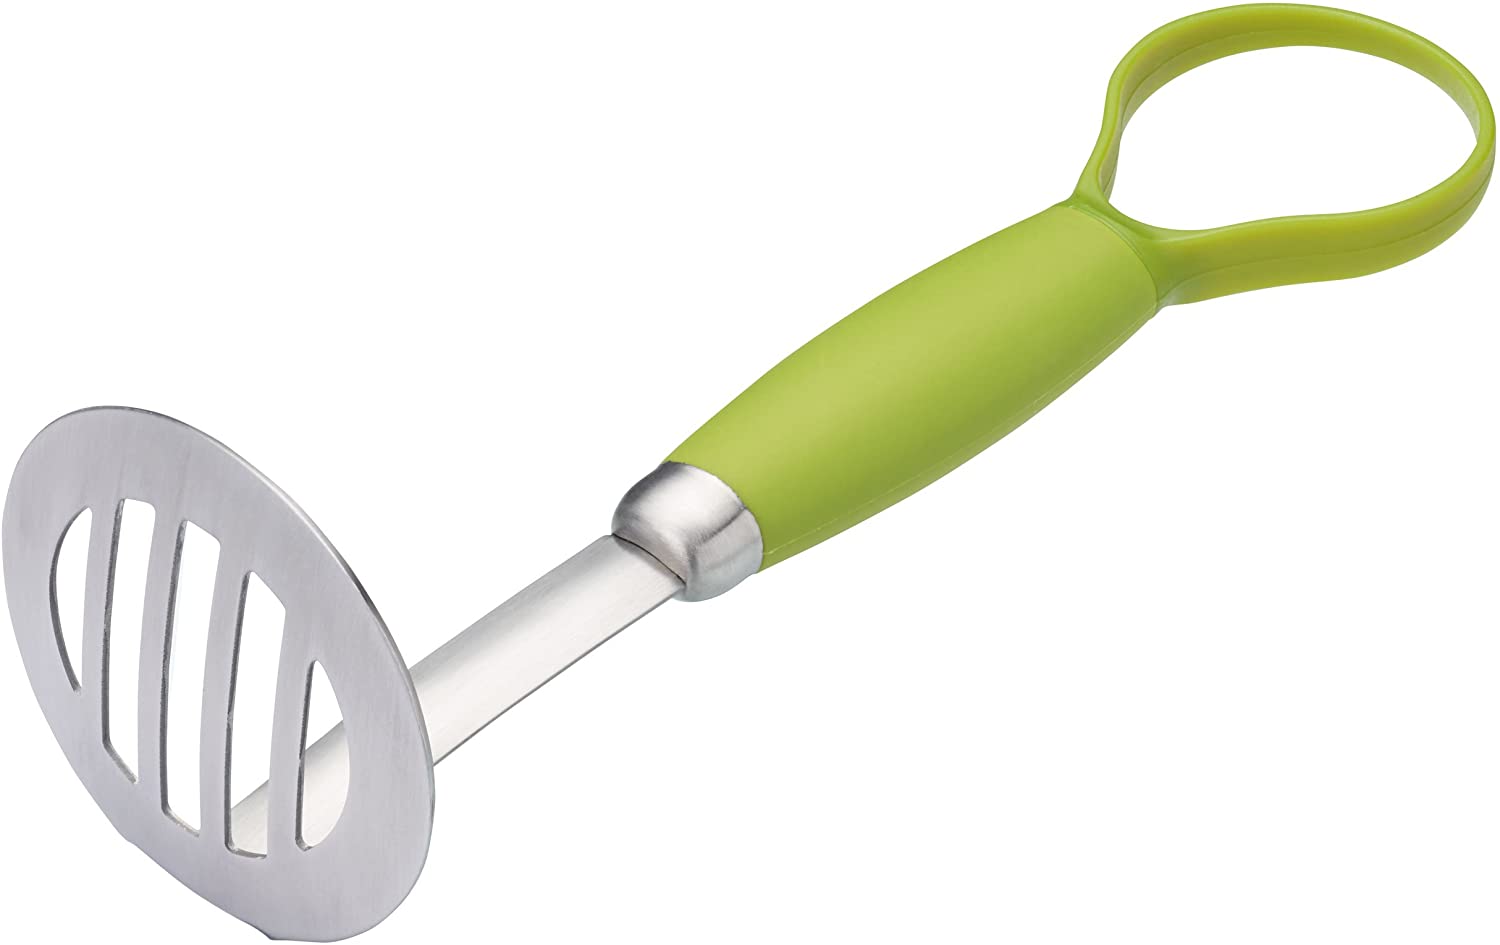 KitchenCraft Kitchen Craft Blade Healthy Eating 2-in-1 Avocado Masher Tool, 19.5 cm (7.5 inches) – Green